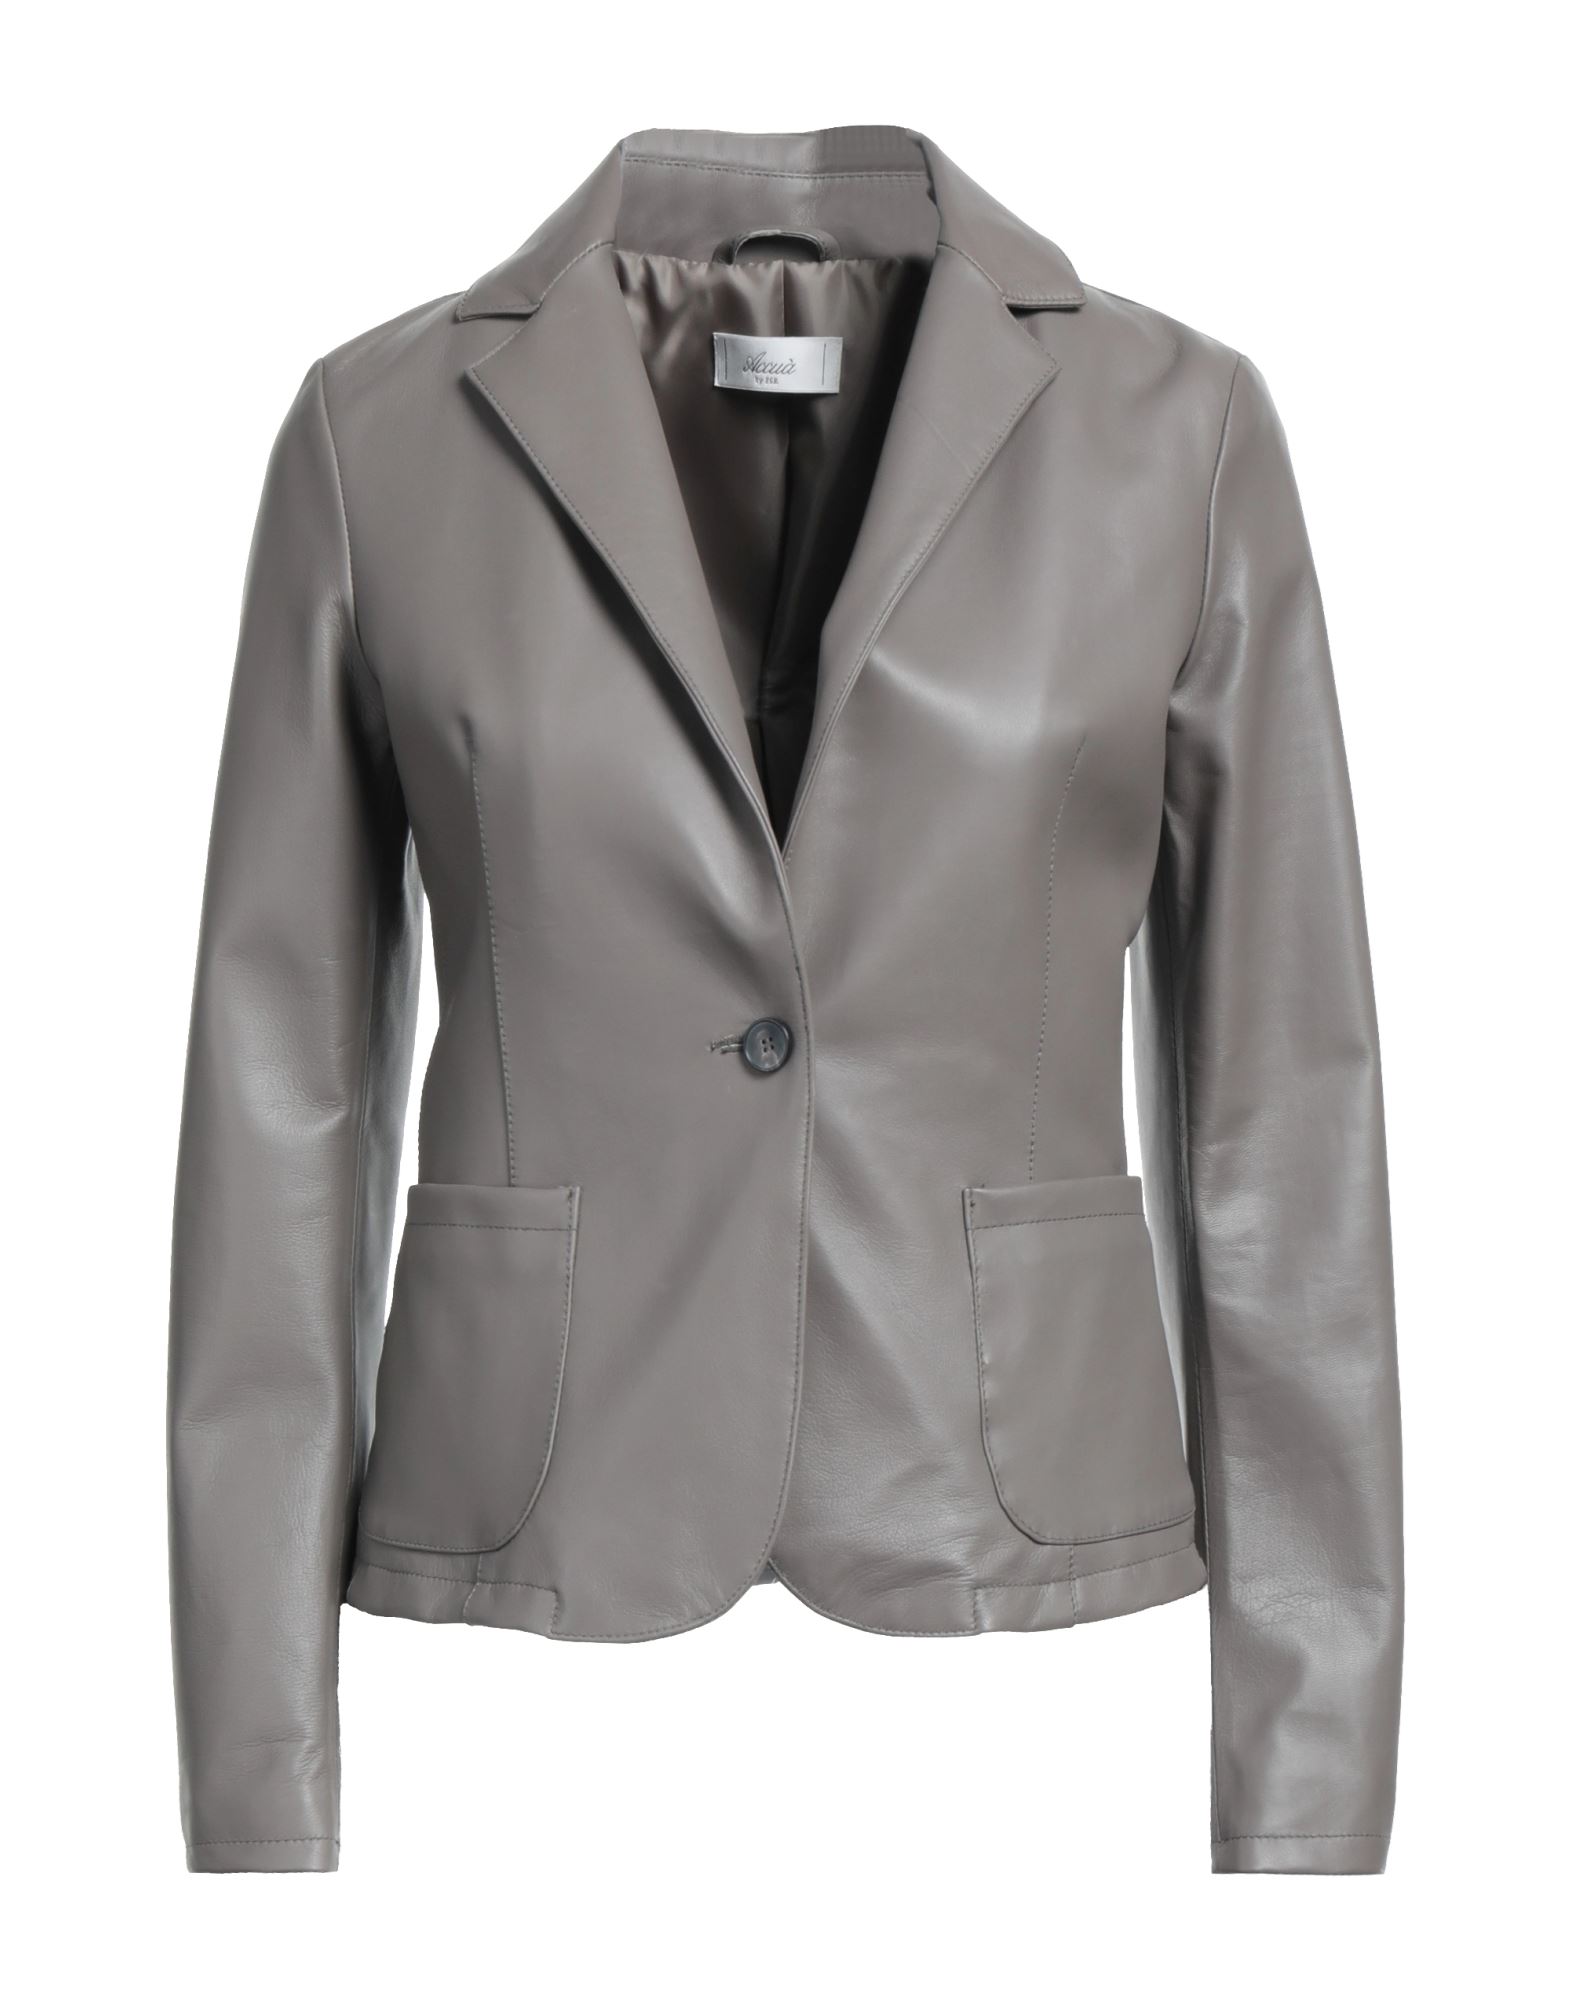 Accuà By Psr Woman Suit Jacket Lead Size 6 Soft Leather In Grey